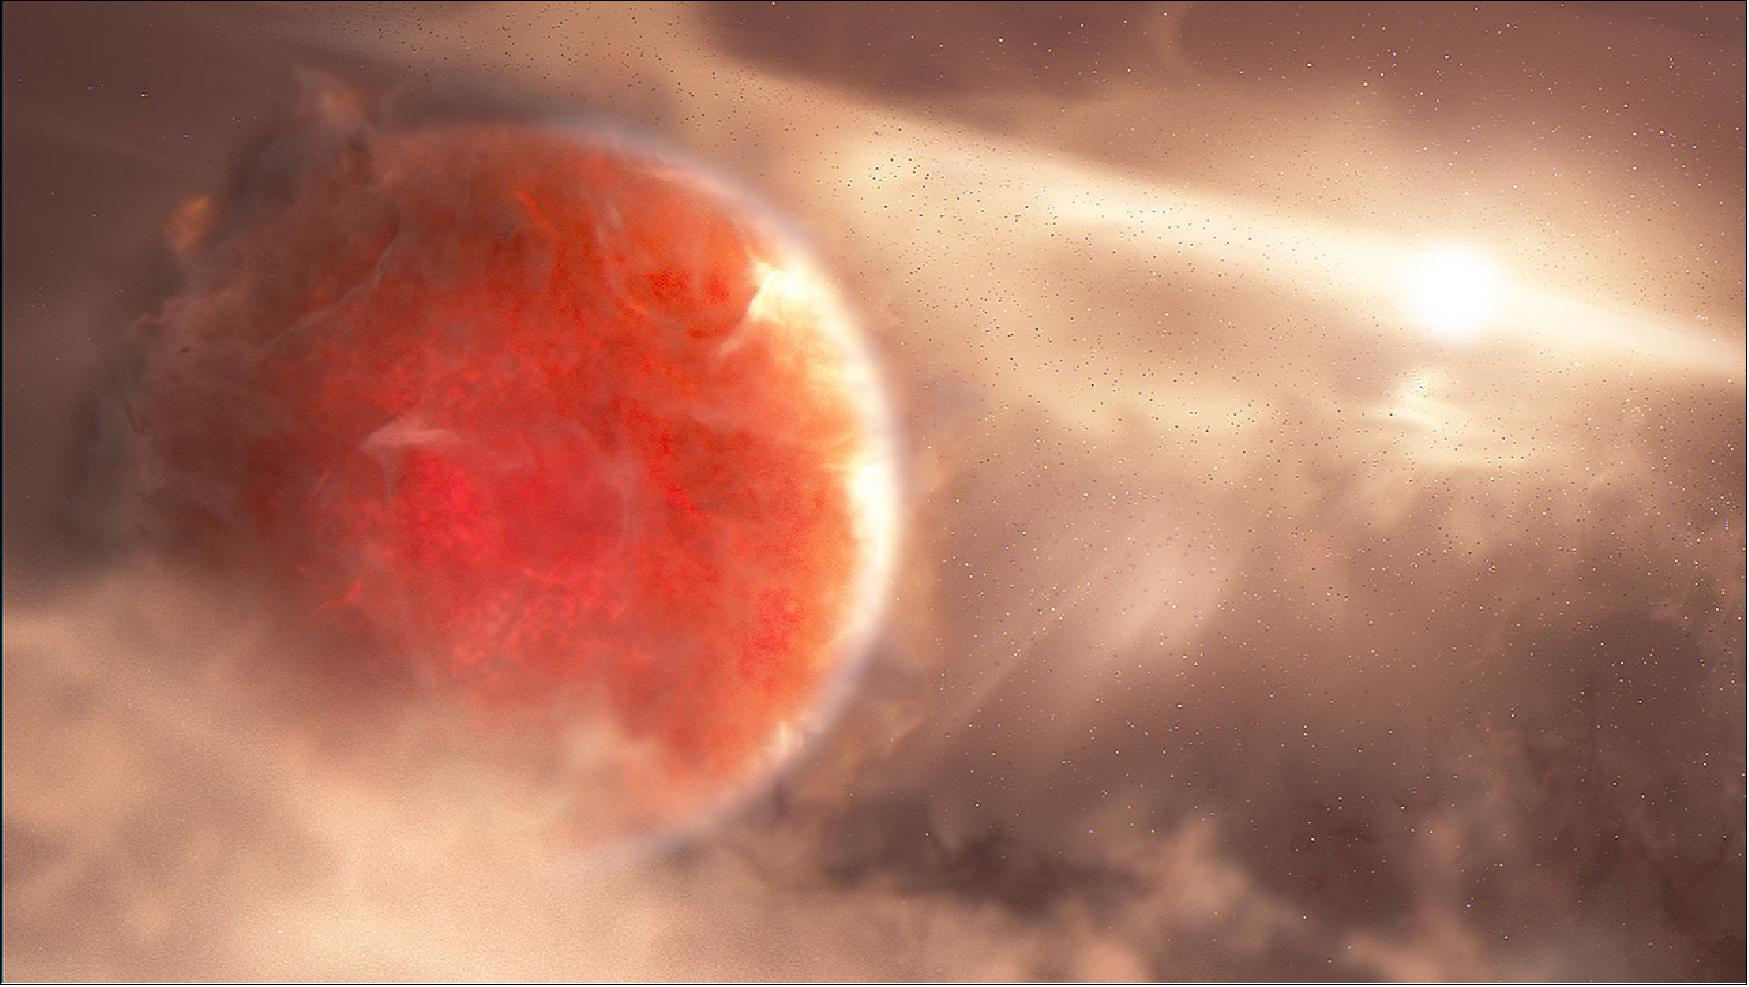 Figure 61: This is an artist's illustration of a massive, newly forming exoplanet called AB Aurigae b. Researchers used new and archival data from the Hubble Space Telescope and the Subaru Telescope to confirm this protoplanet is forming through an intense and violent process, called disk instability. Disk instability is a top-down approach, much different from the dominant core accretion model. In this scenario, a massive disk around a star cools, and gravity causes the disk to rapidly break up into one or more planet-mass fragments. — AB Aurigae b is estimated to be about nine times more massive than Jupiter and orbits its host star over two times farther than Pluto is from our Sun [image credits: ARTWORK: NASA, ESA, Joseph Olmsted (STScI)]